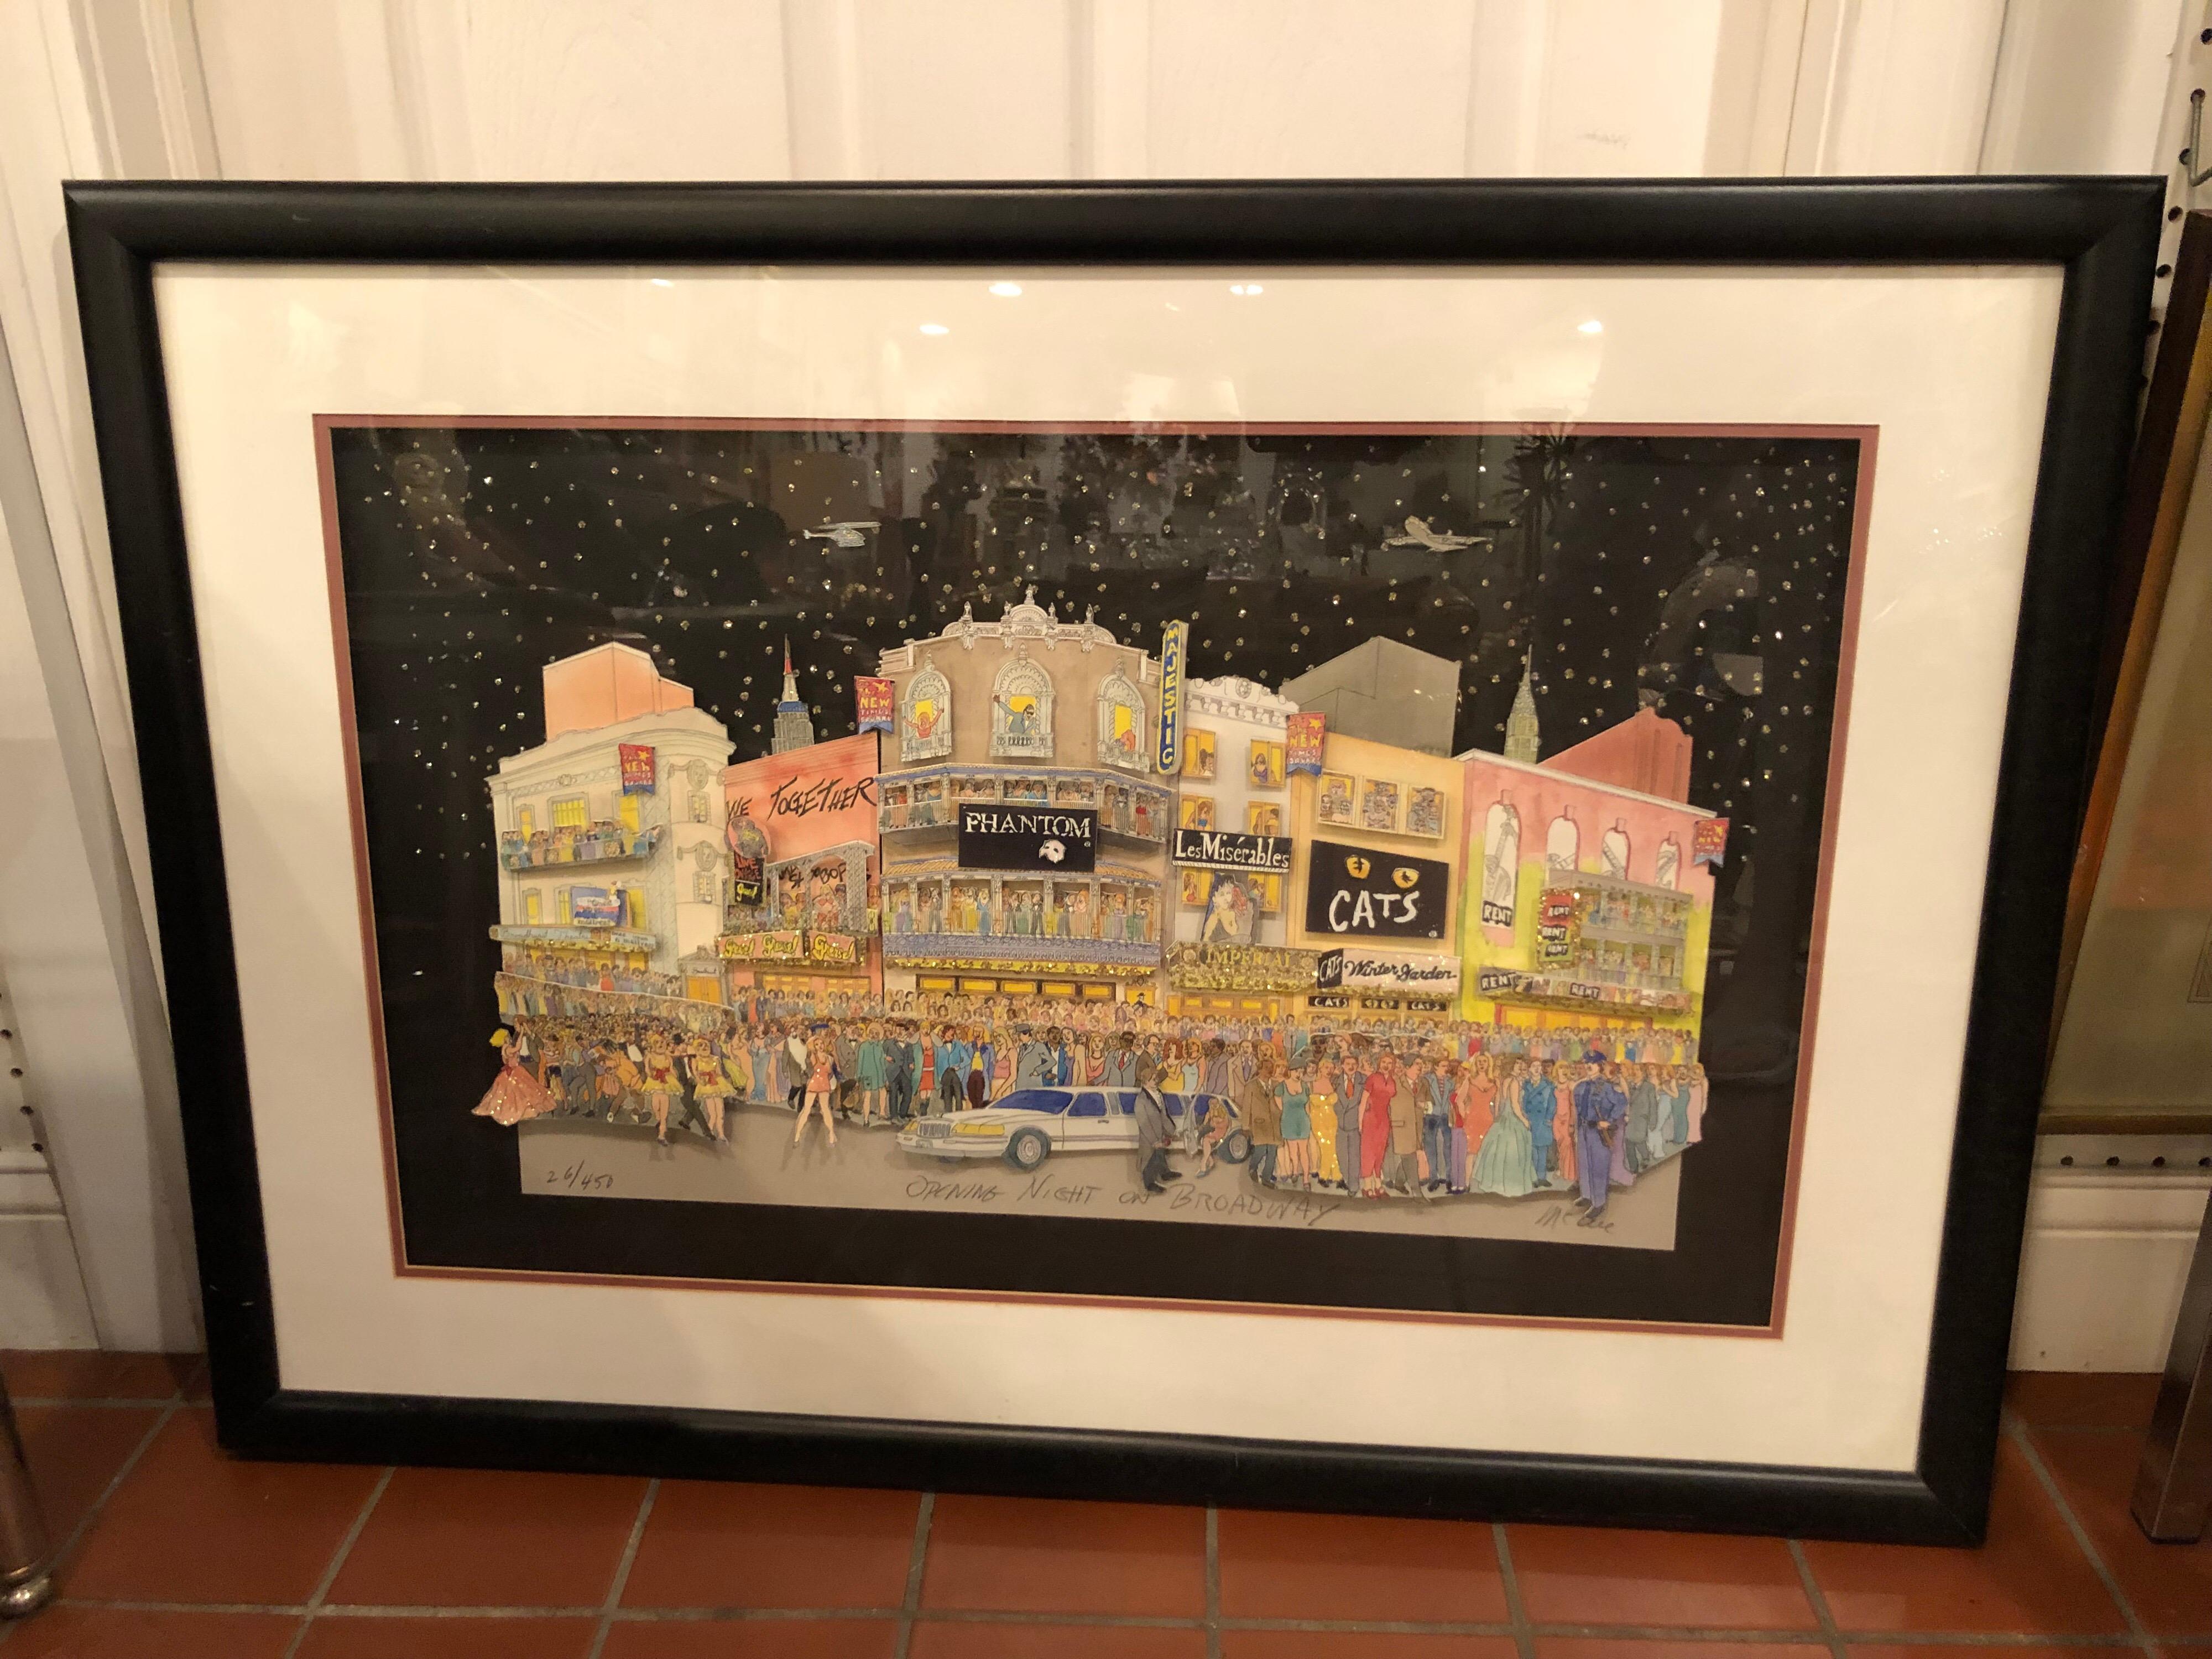 Signed 3 D Art of Broadway by McCue. Very similar to Charles Fazzino's work . 3D images featuring famous Broadway shows in the mid 1980s and the Architecture of Times Square. The Broadway shows running at that time were Cats, Phantom of the Opera,